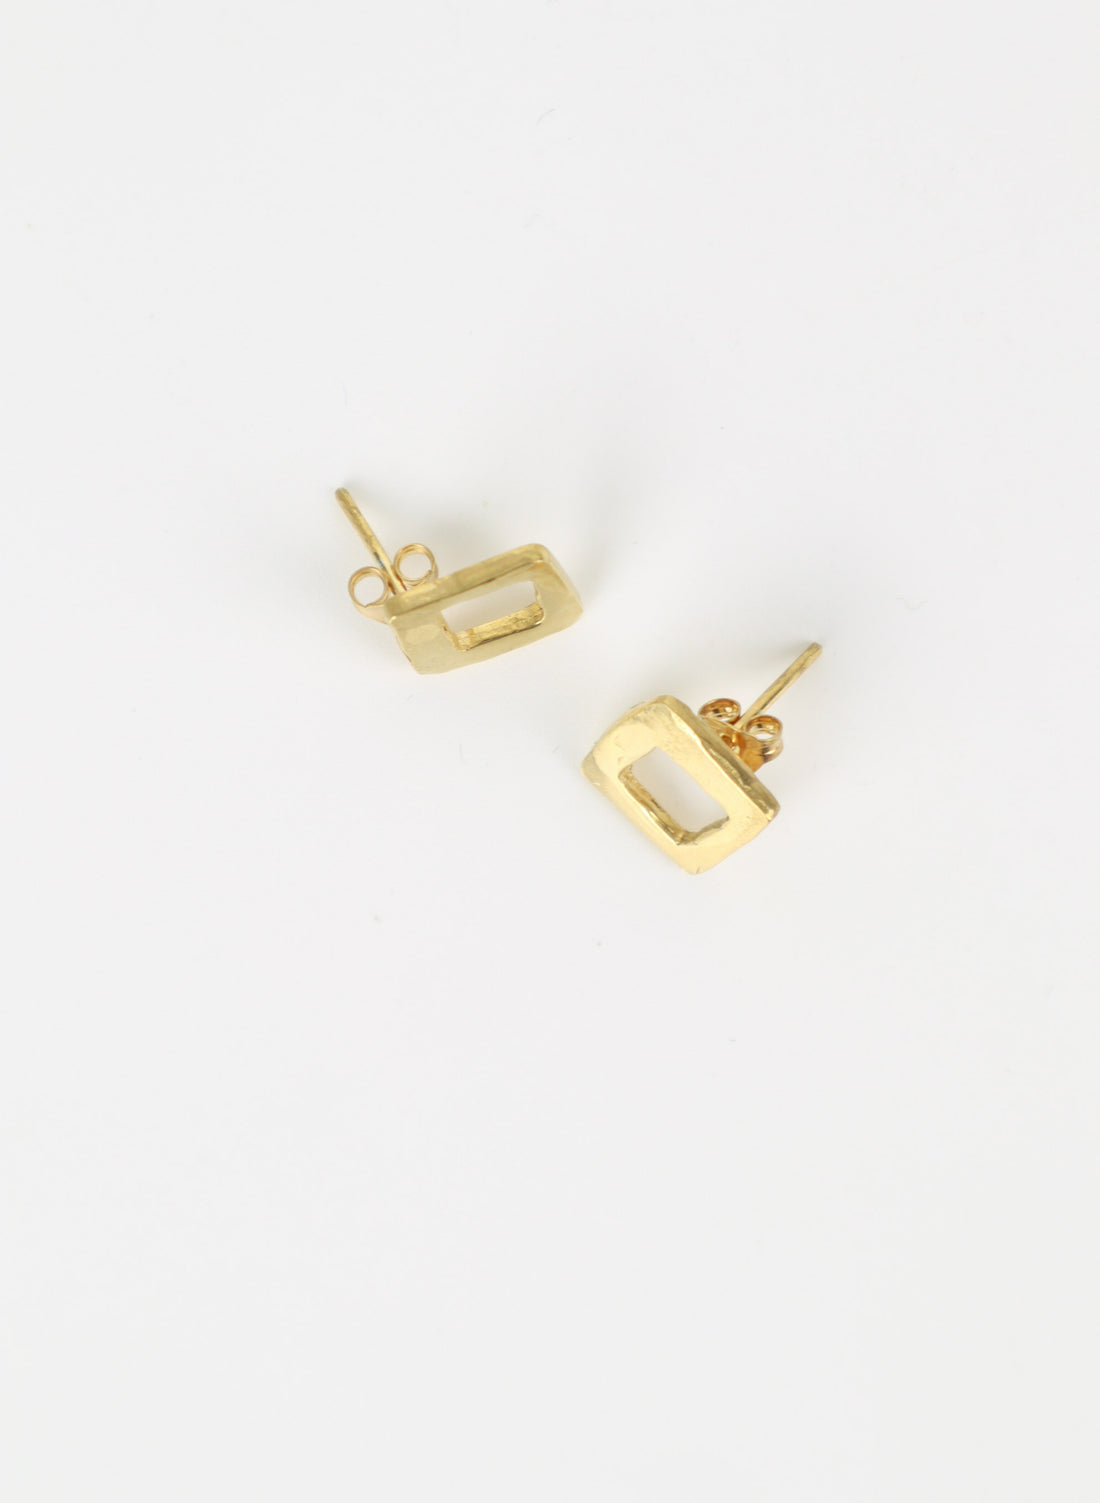 Modernist Earring No.5a - 18ct